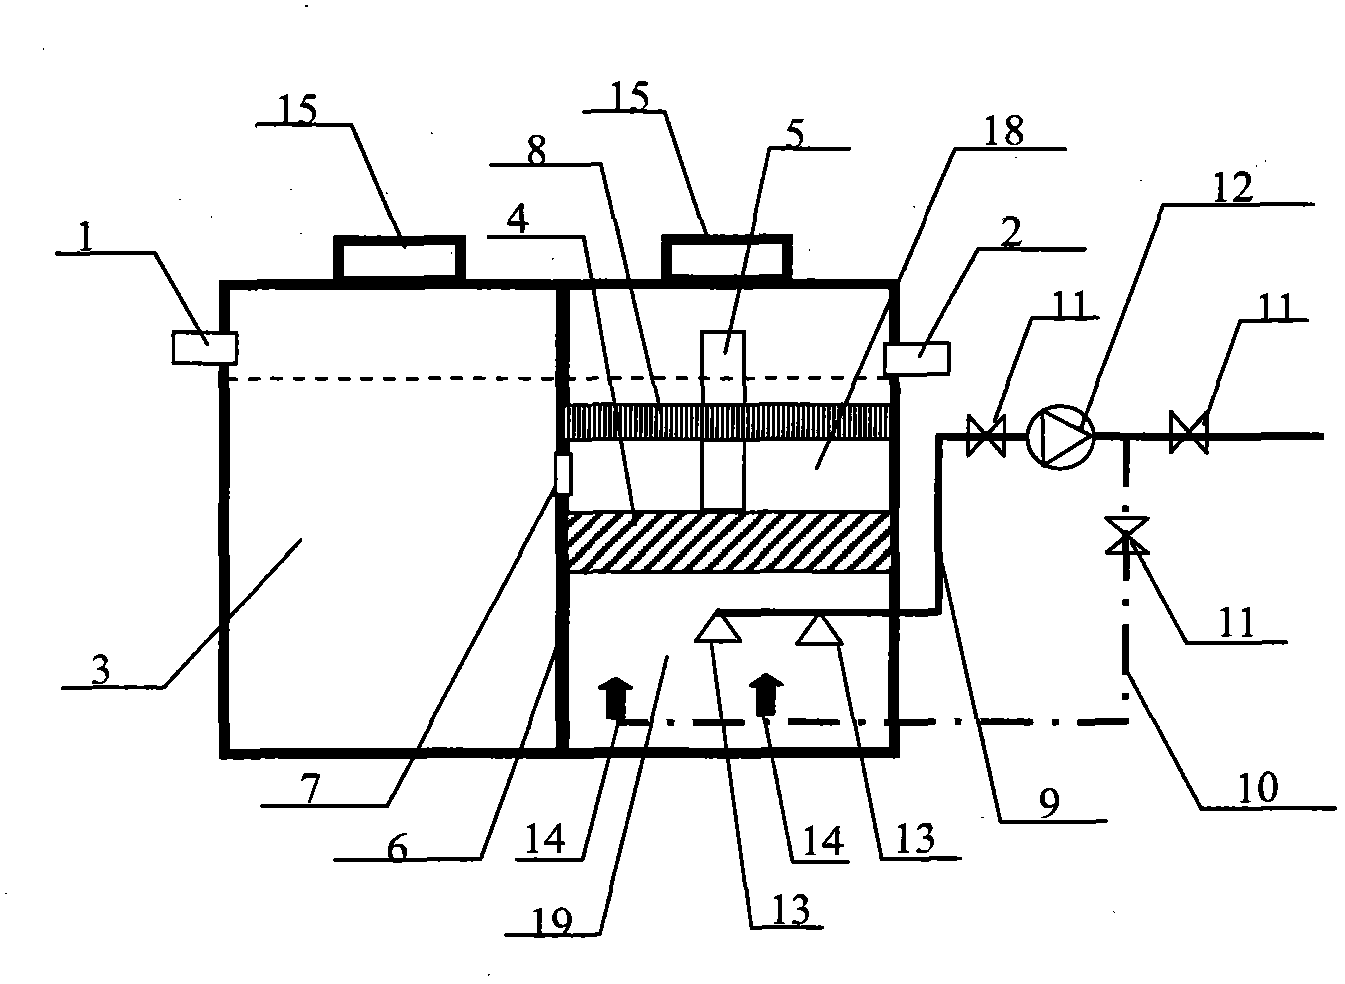 Digested sludge recycling method and device